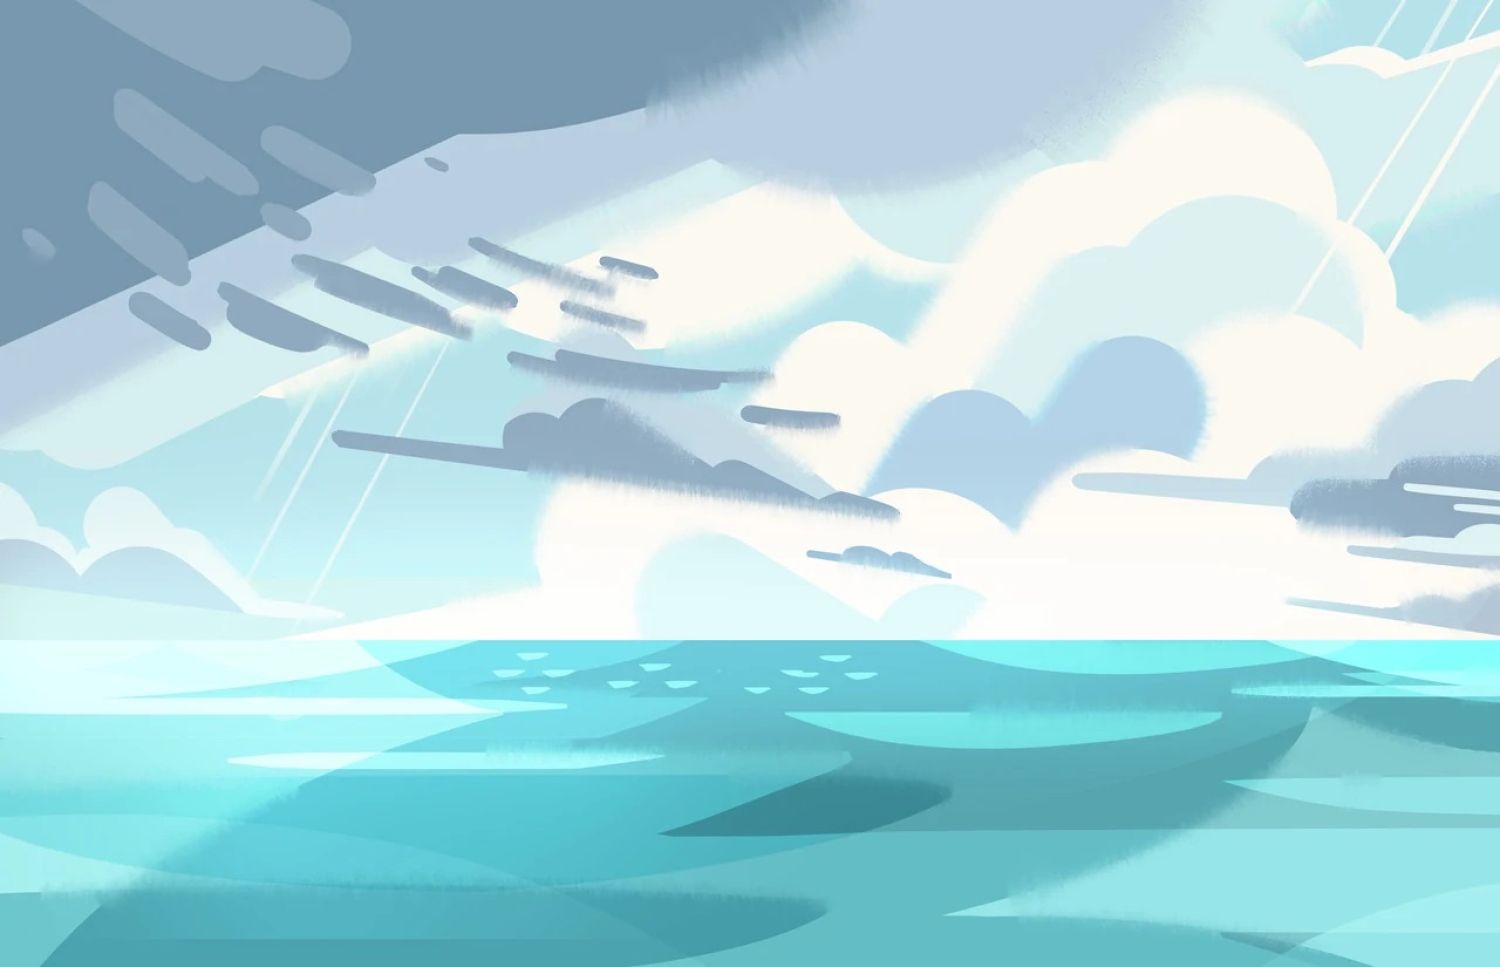 CalArts-style illustration of a blue sea on a partly cloudy day